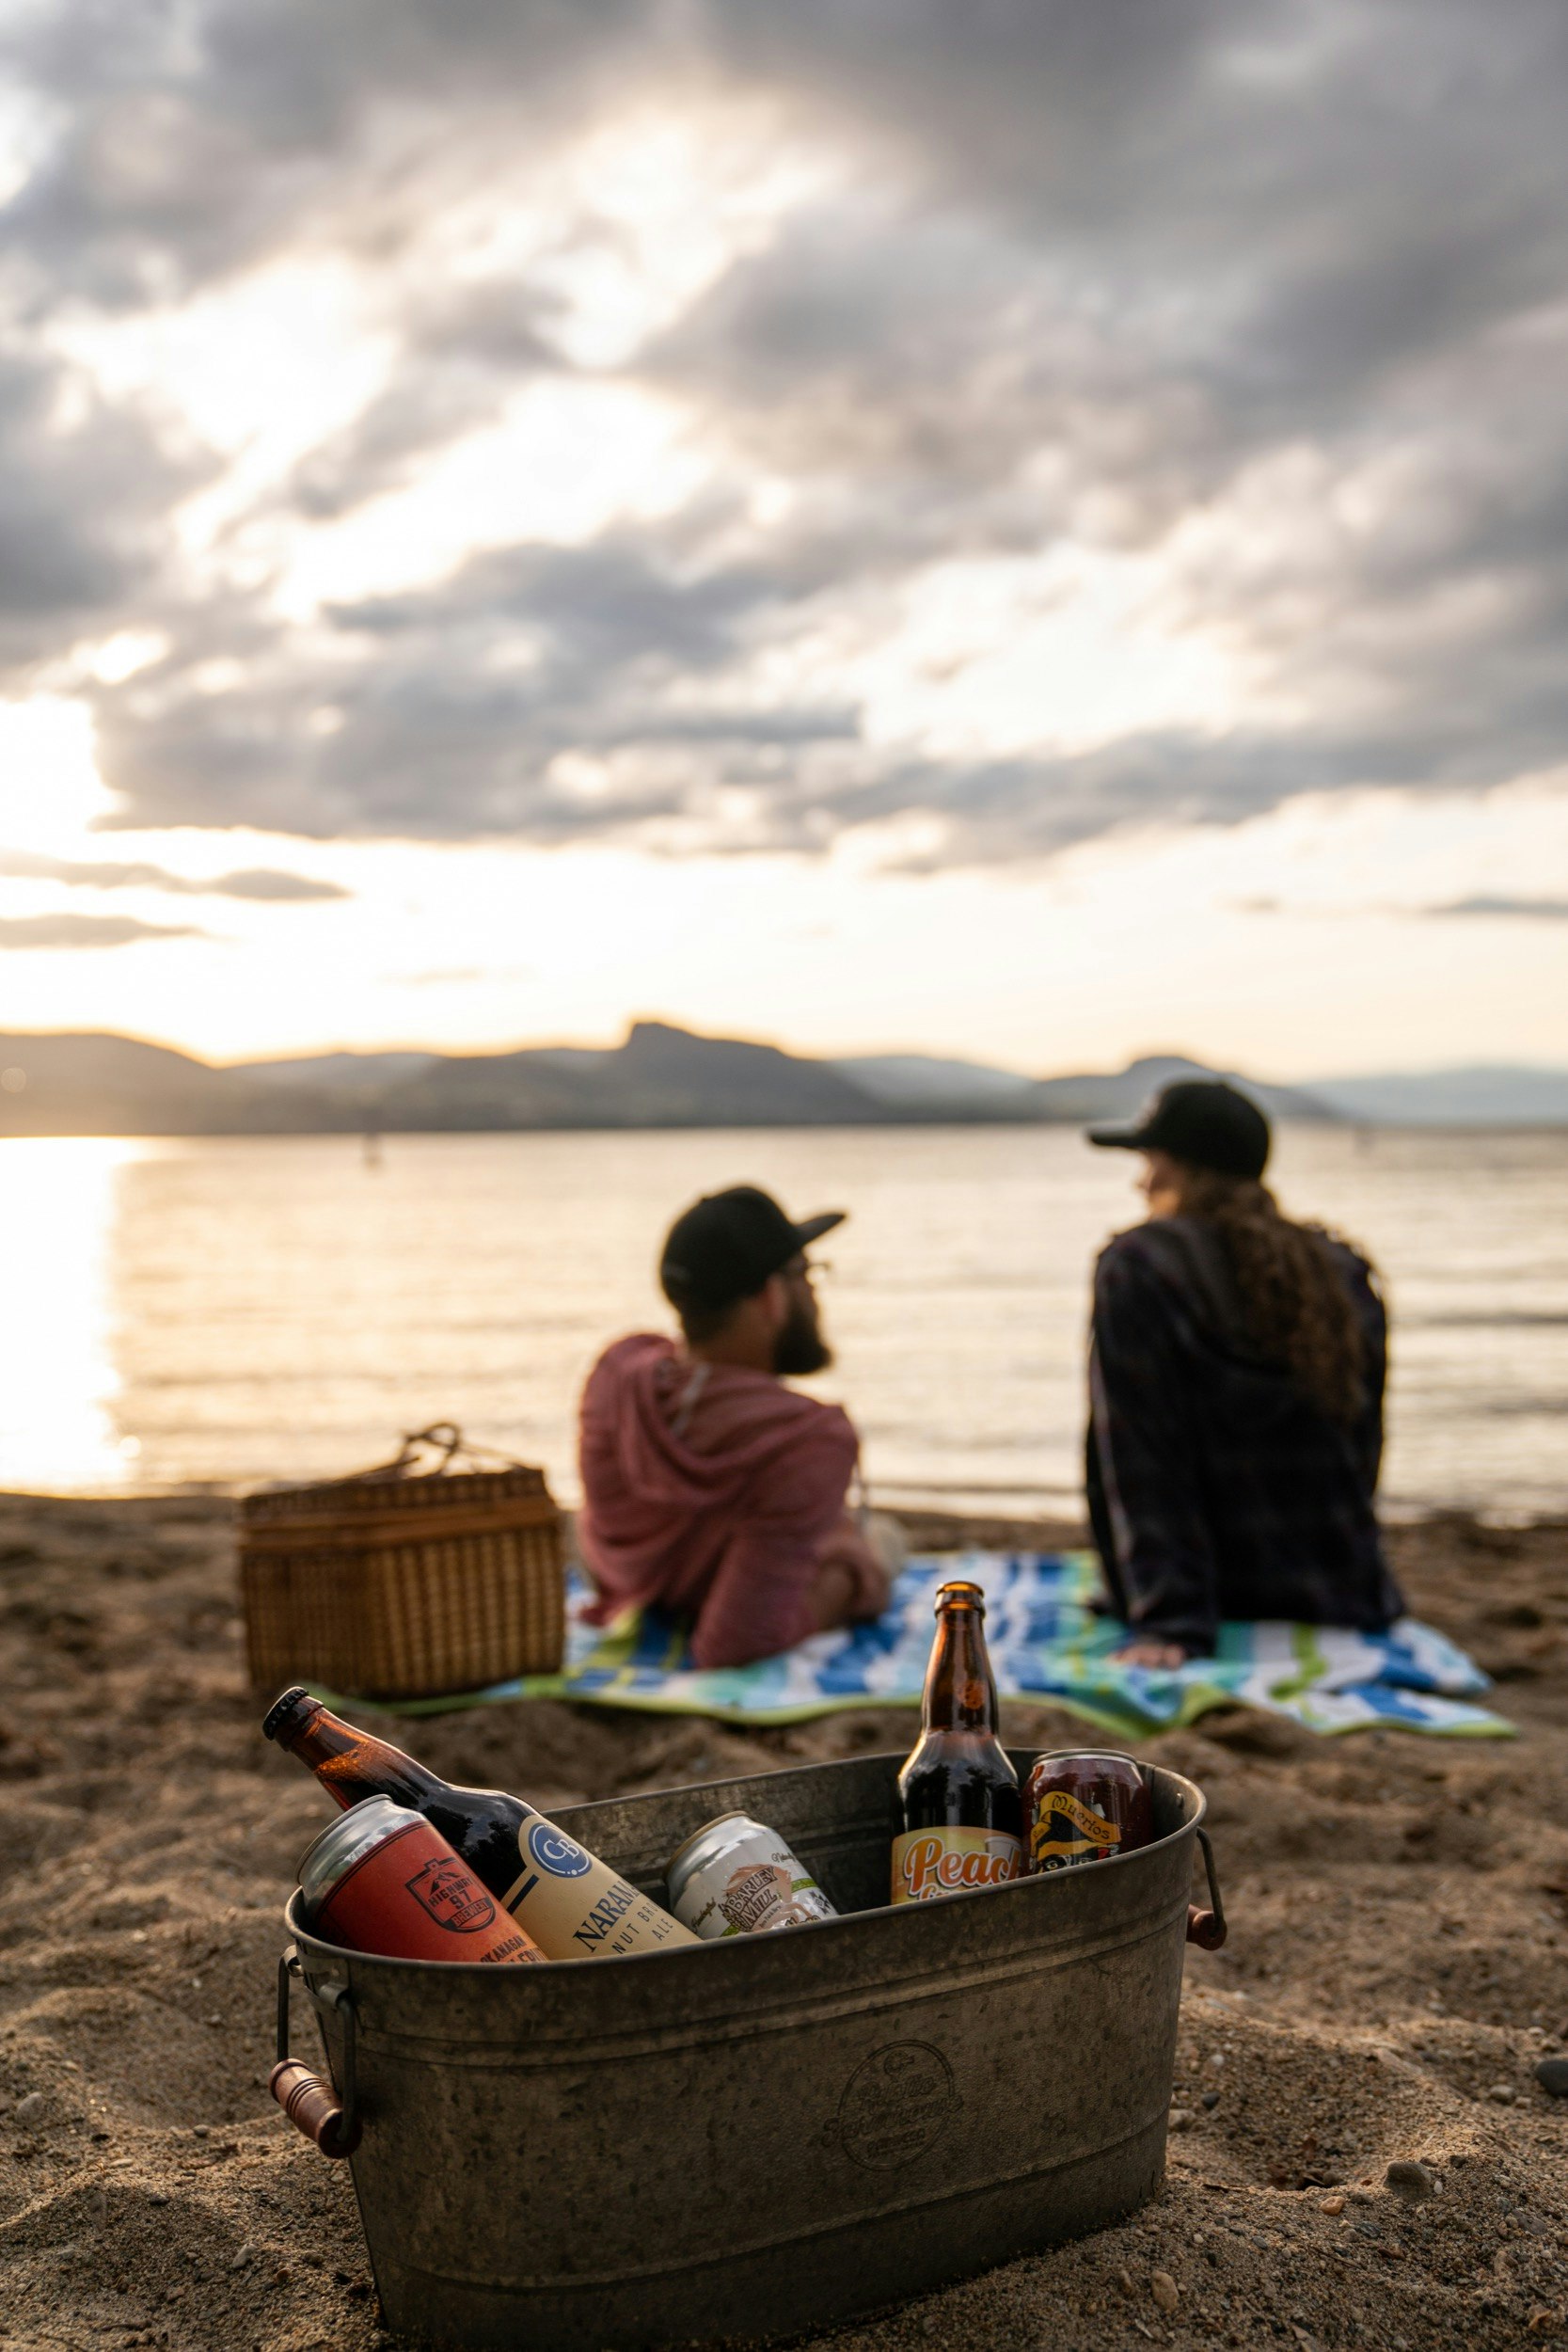 A metal bucket with a selection of craft beers sits behind a couple picnicing on the sand beside a lake.